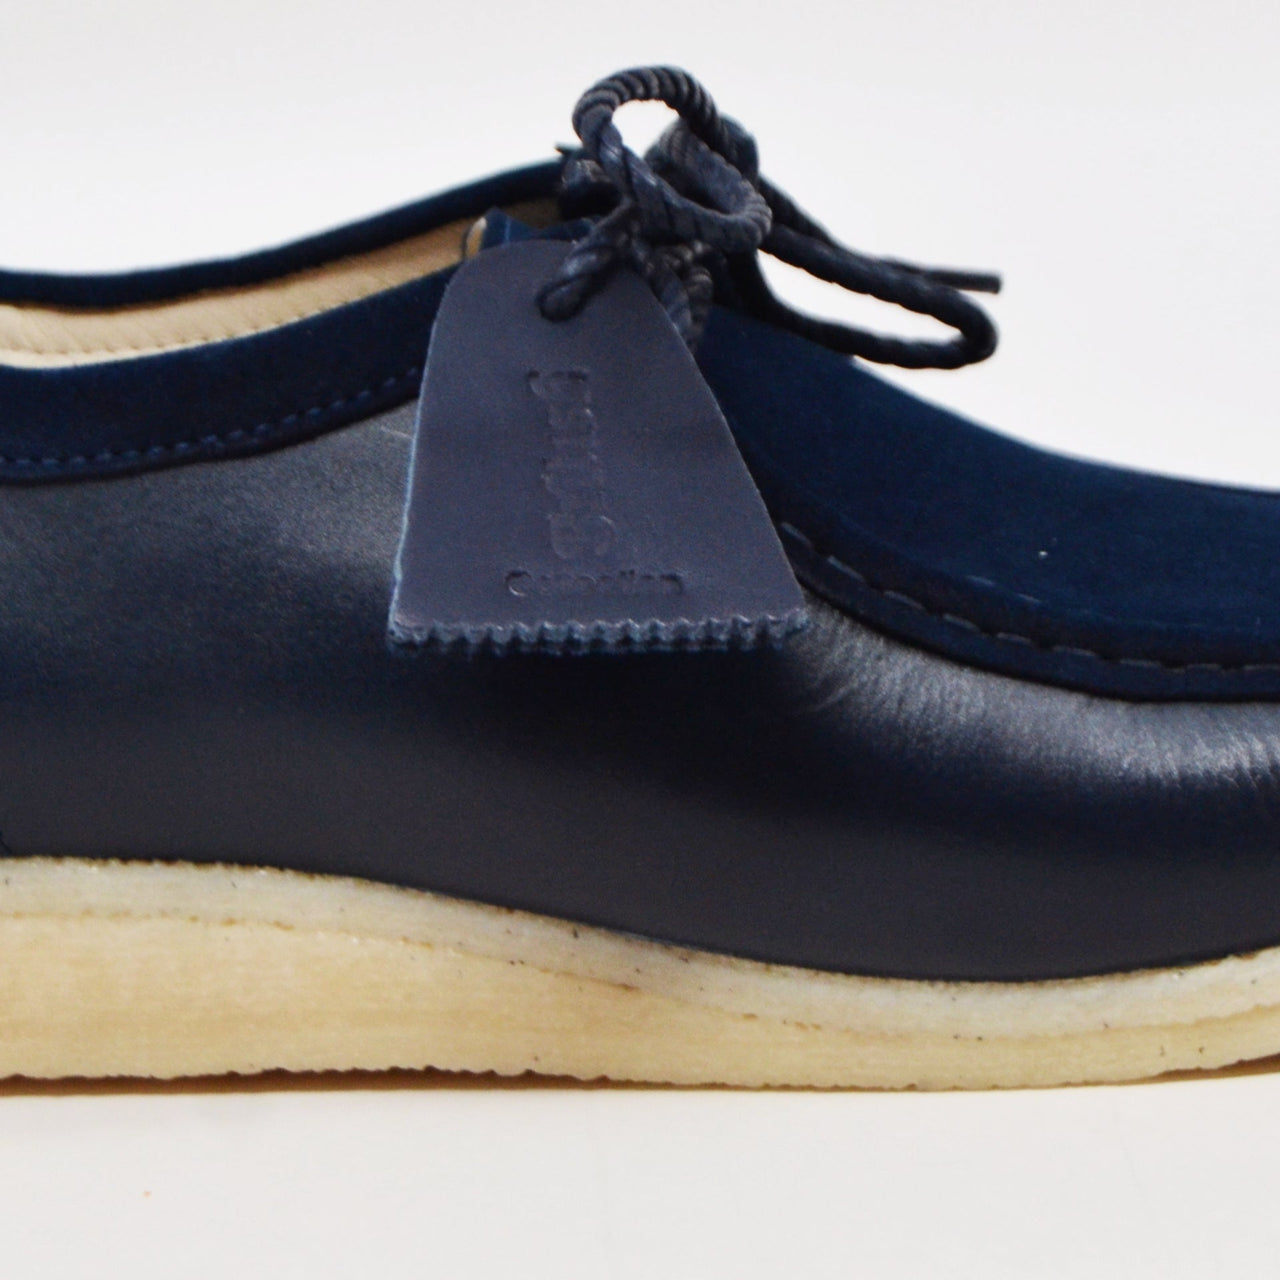 British Walkers Wallabee Low Top Men's Suede and Leather Crepe Sole